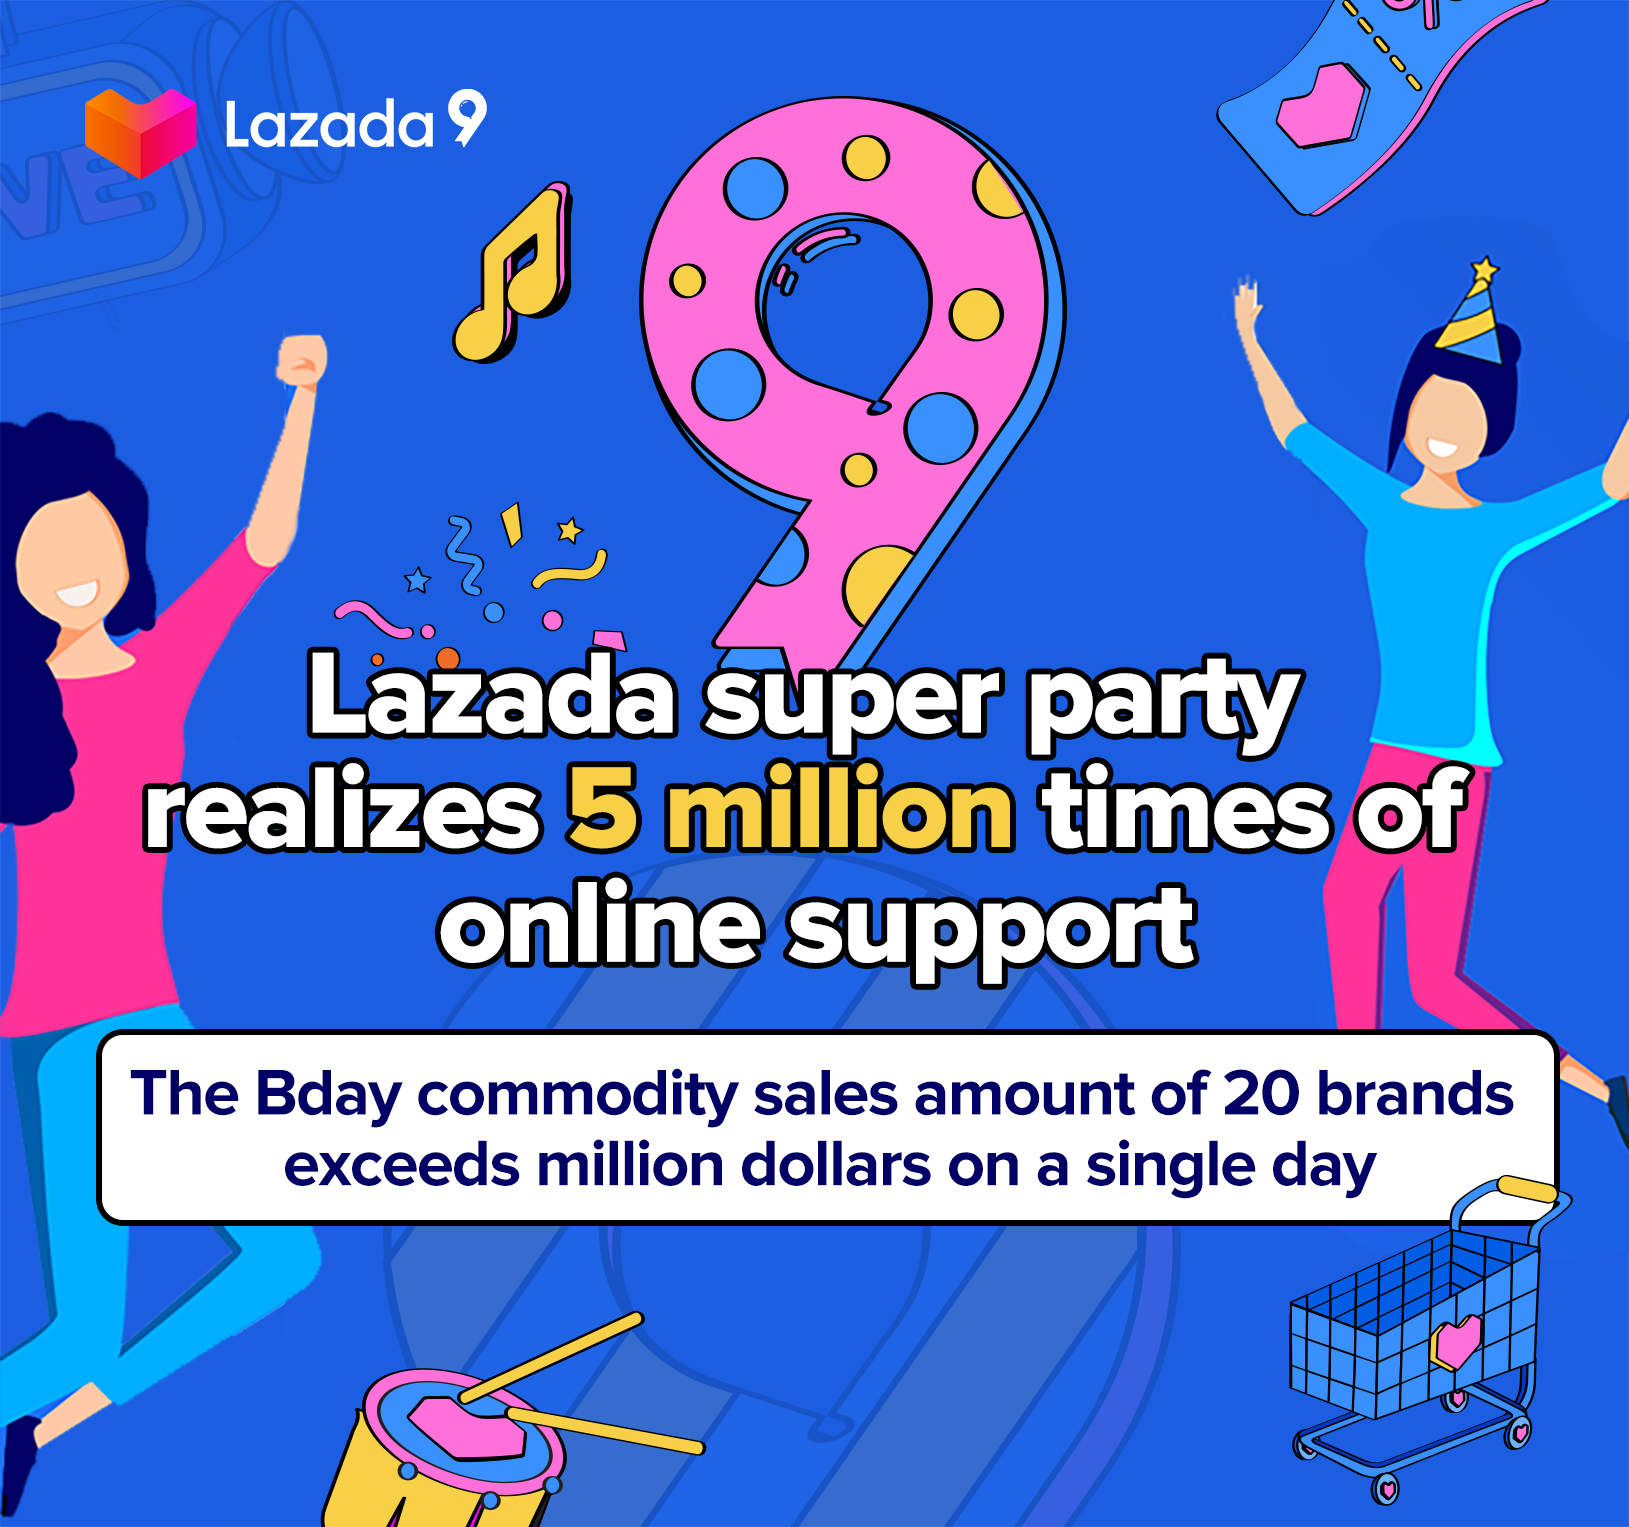 Lazada’s birthday party received 5 million online supporting, with 20 brands achieving one-day sales of more than million dollars！